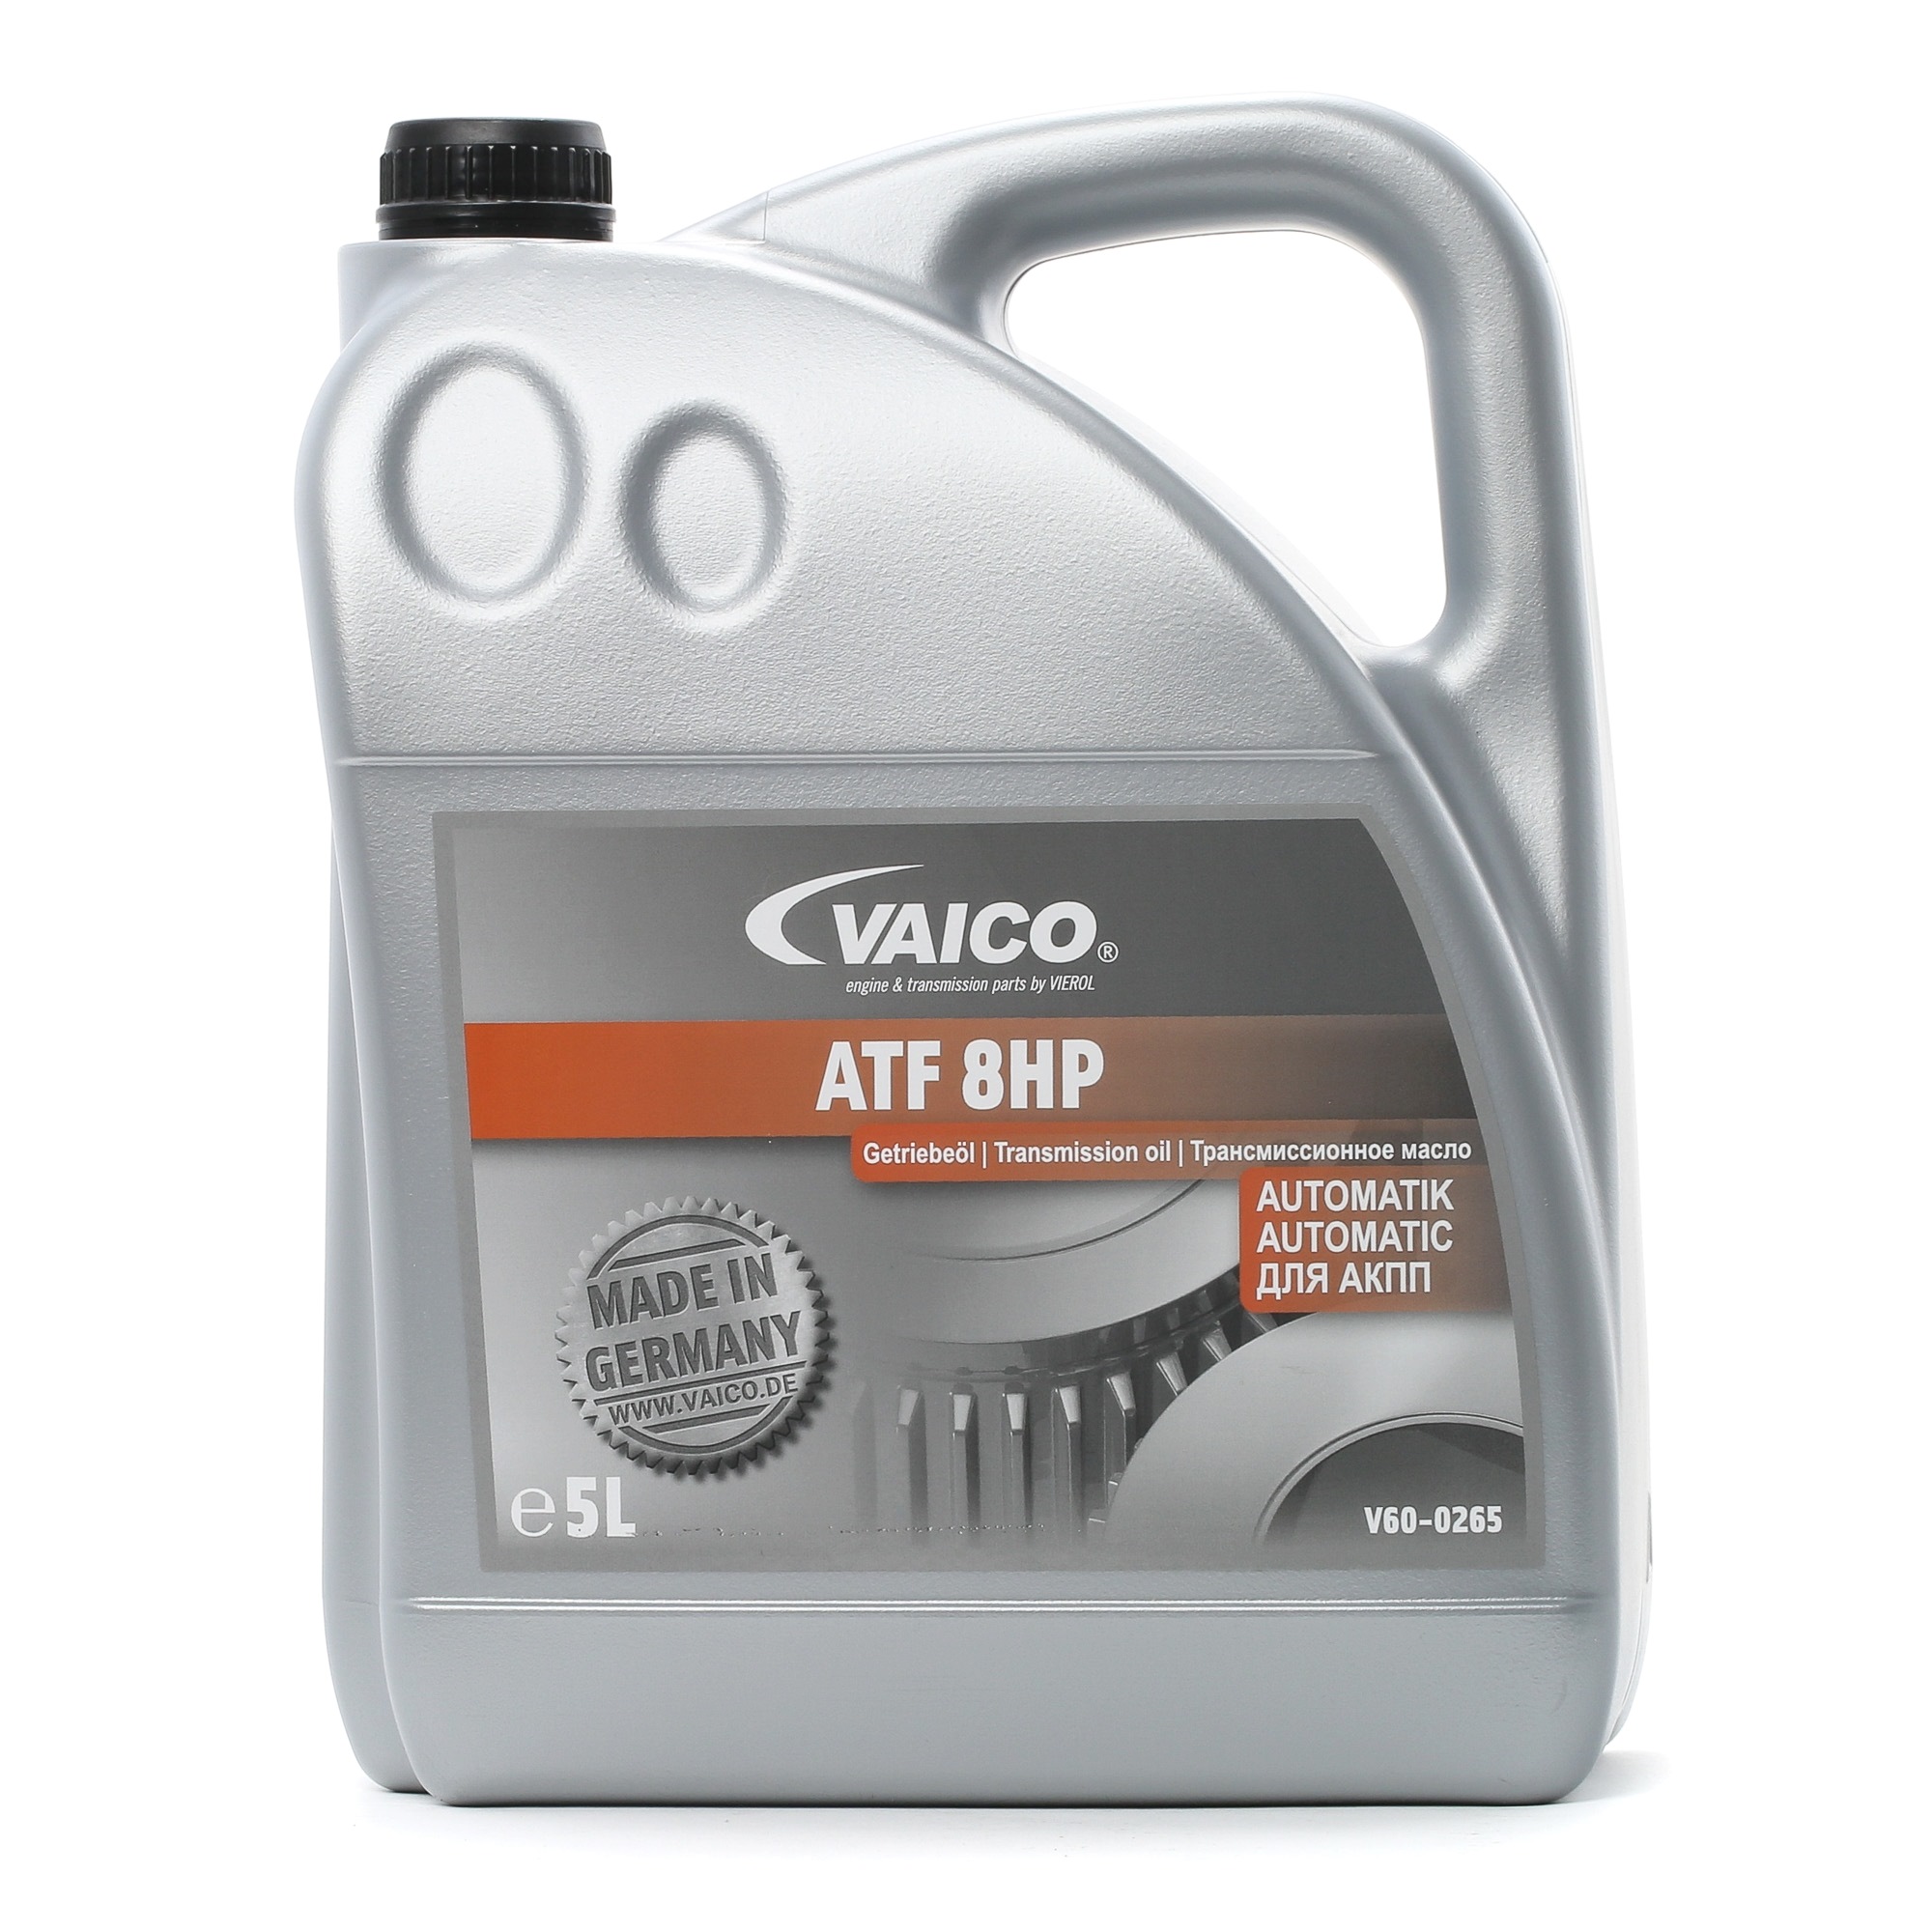 Great value for money - VAICO Automatic transmission fluid V60-0265